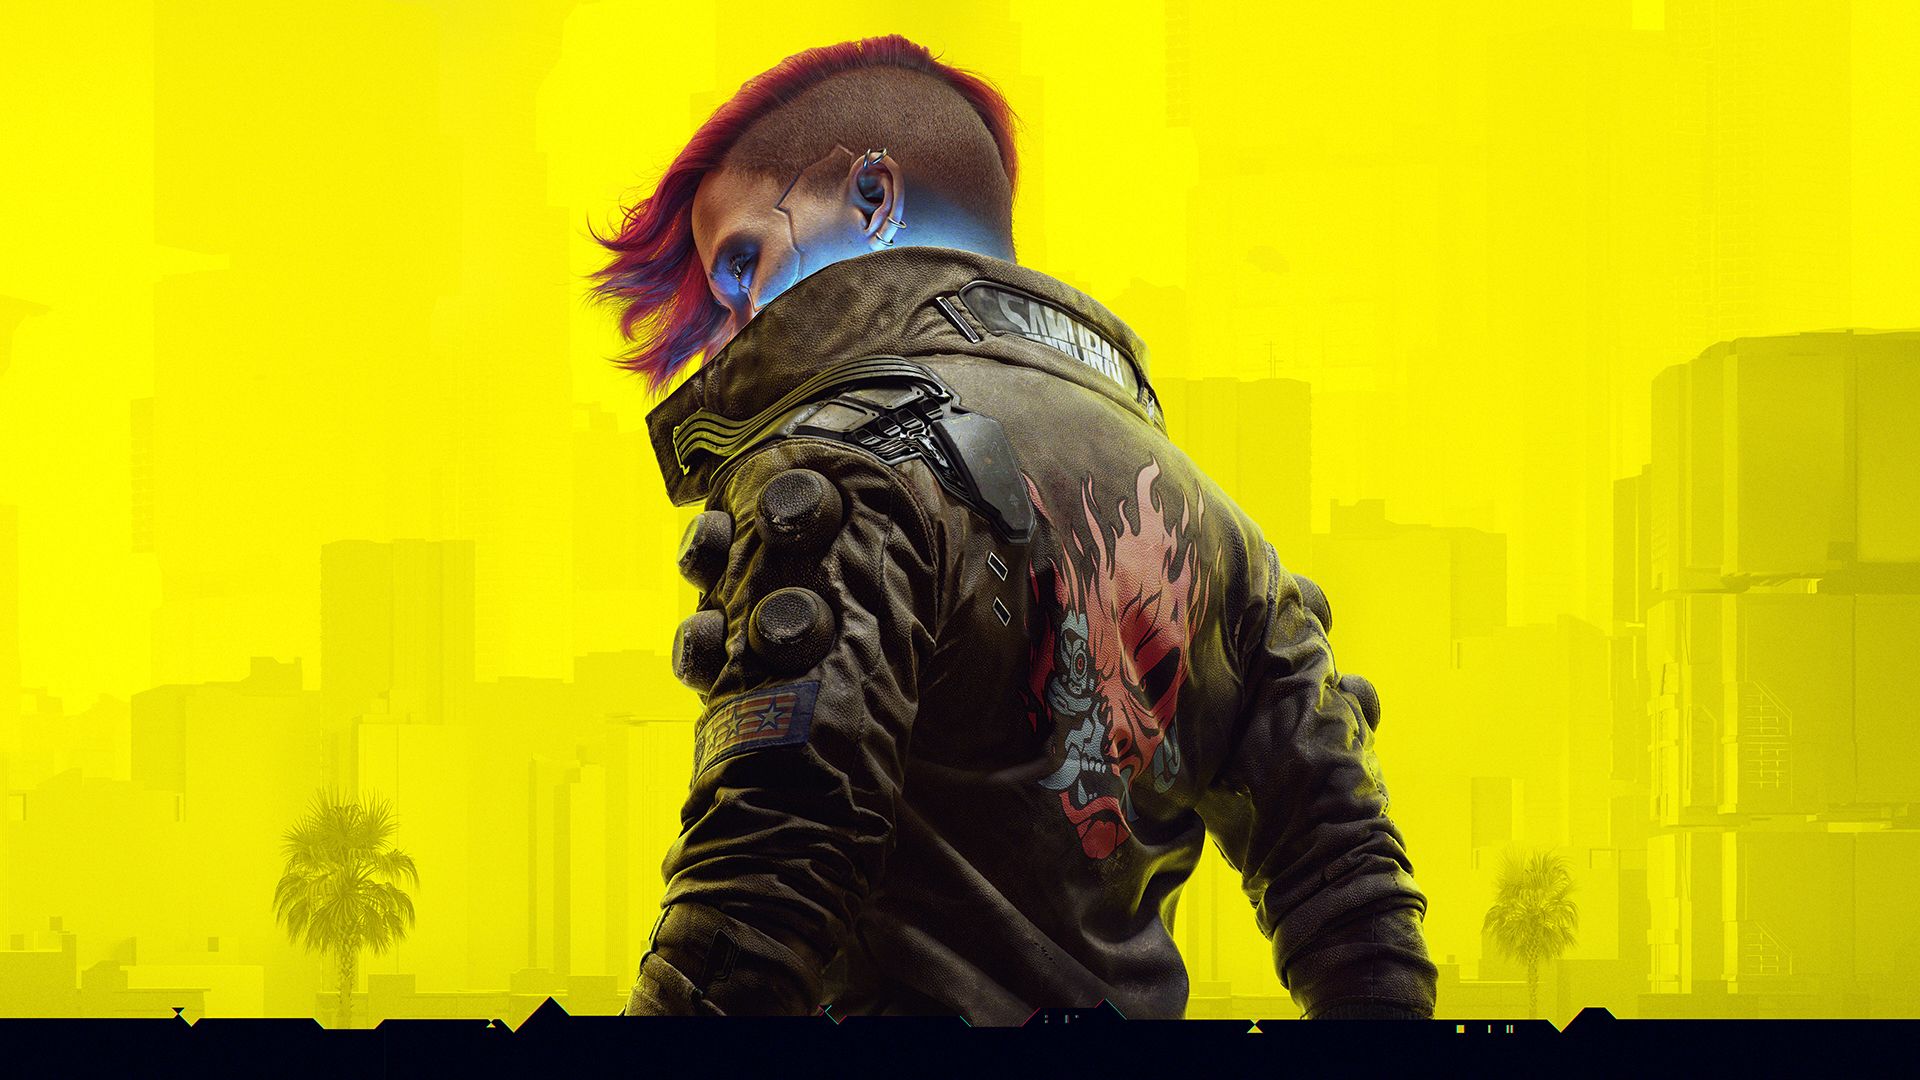 How to Make the Most of Cyberpunk 2077 During Xbox Free Play Days for All